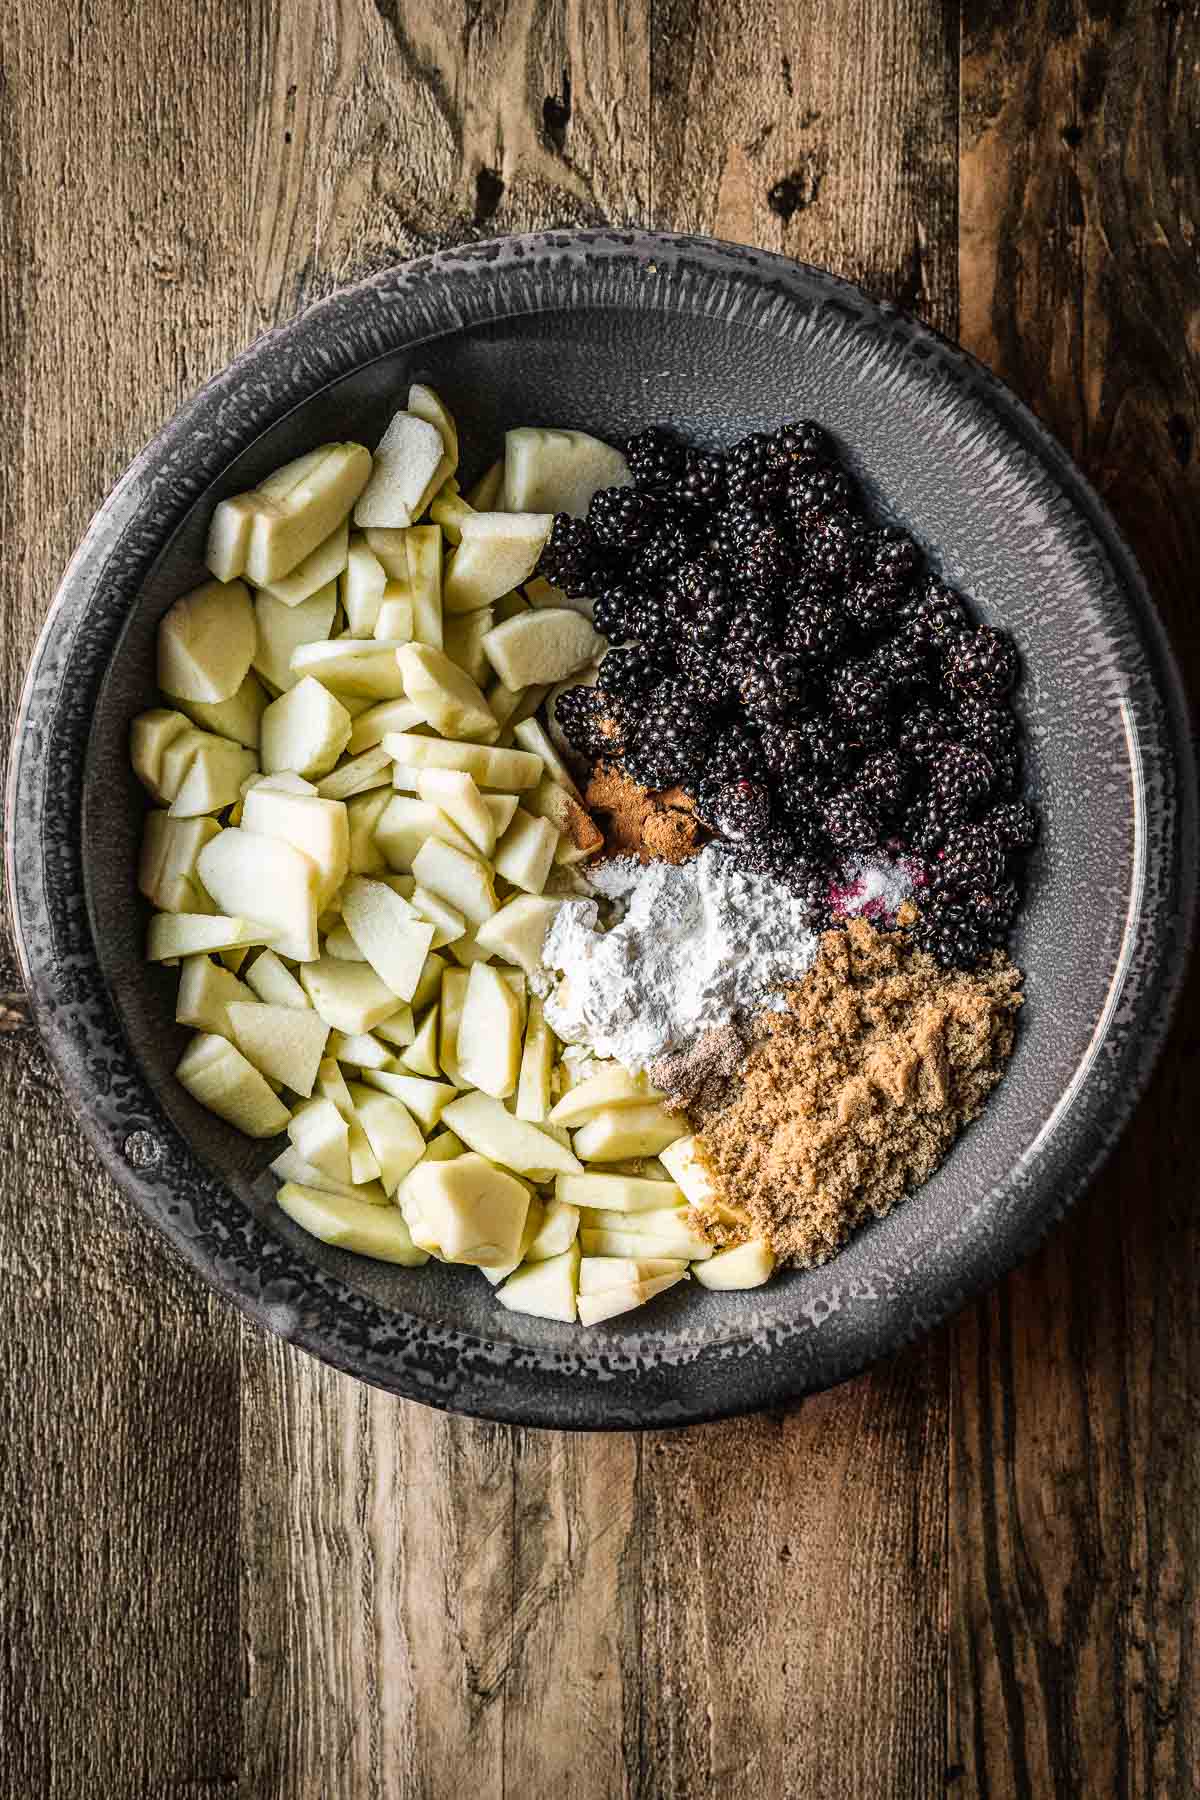 A rustic metal bowl of chopped apples, blackberries and other ingredients before mixing them together.